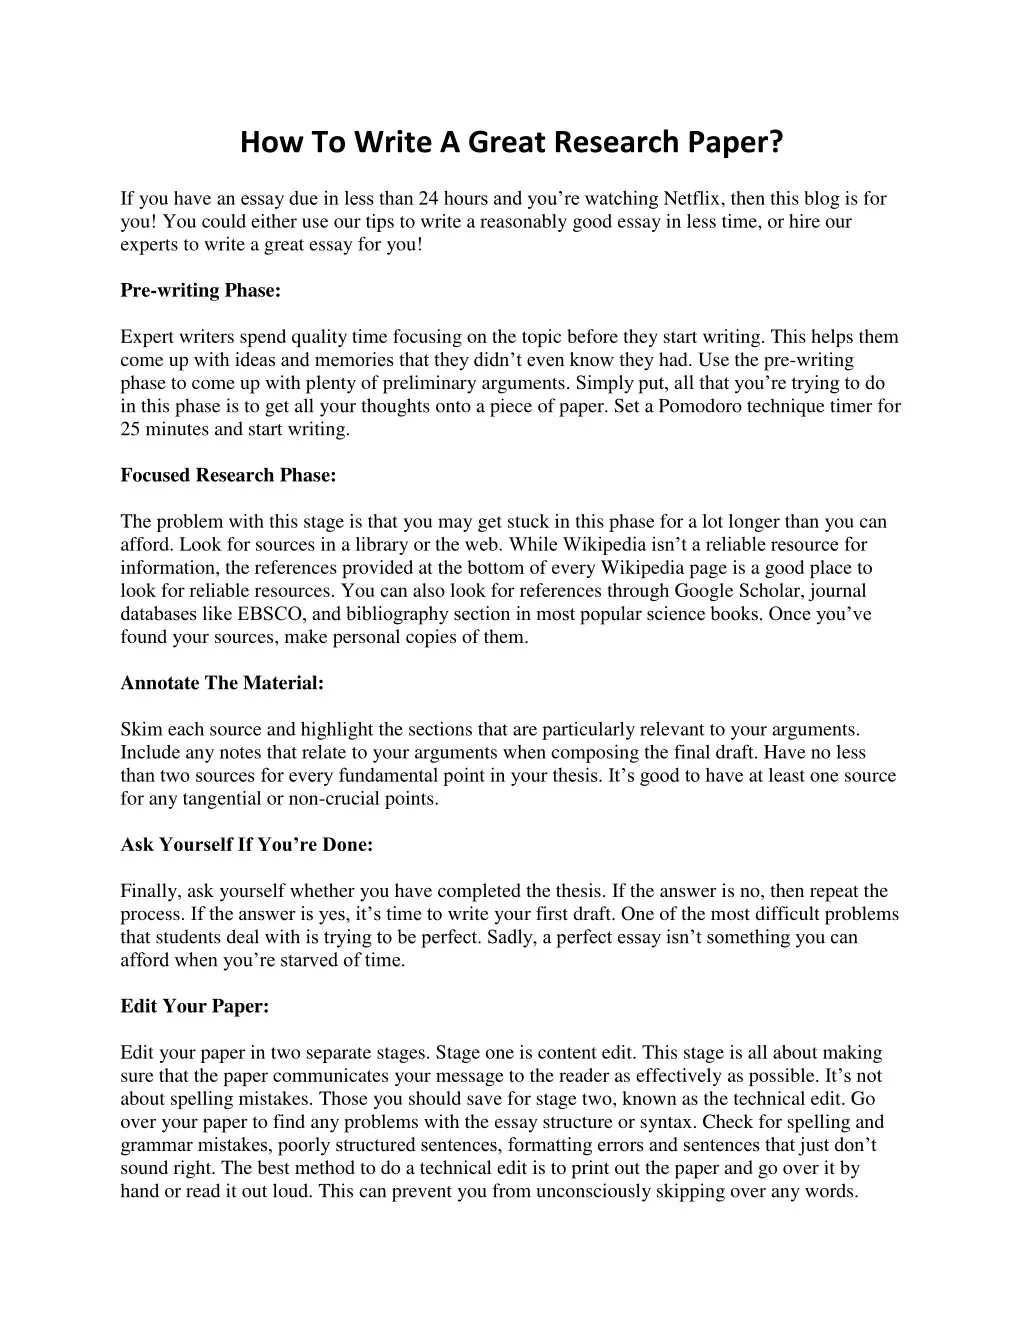 how to write a great research paper